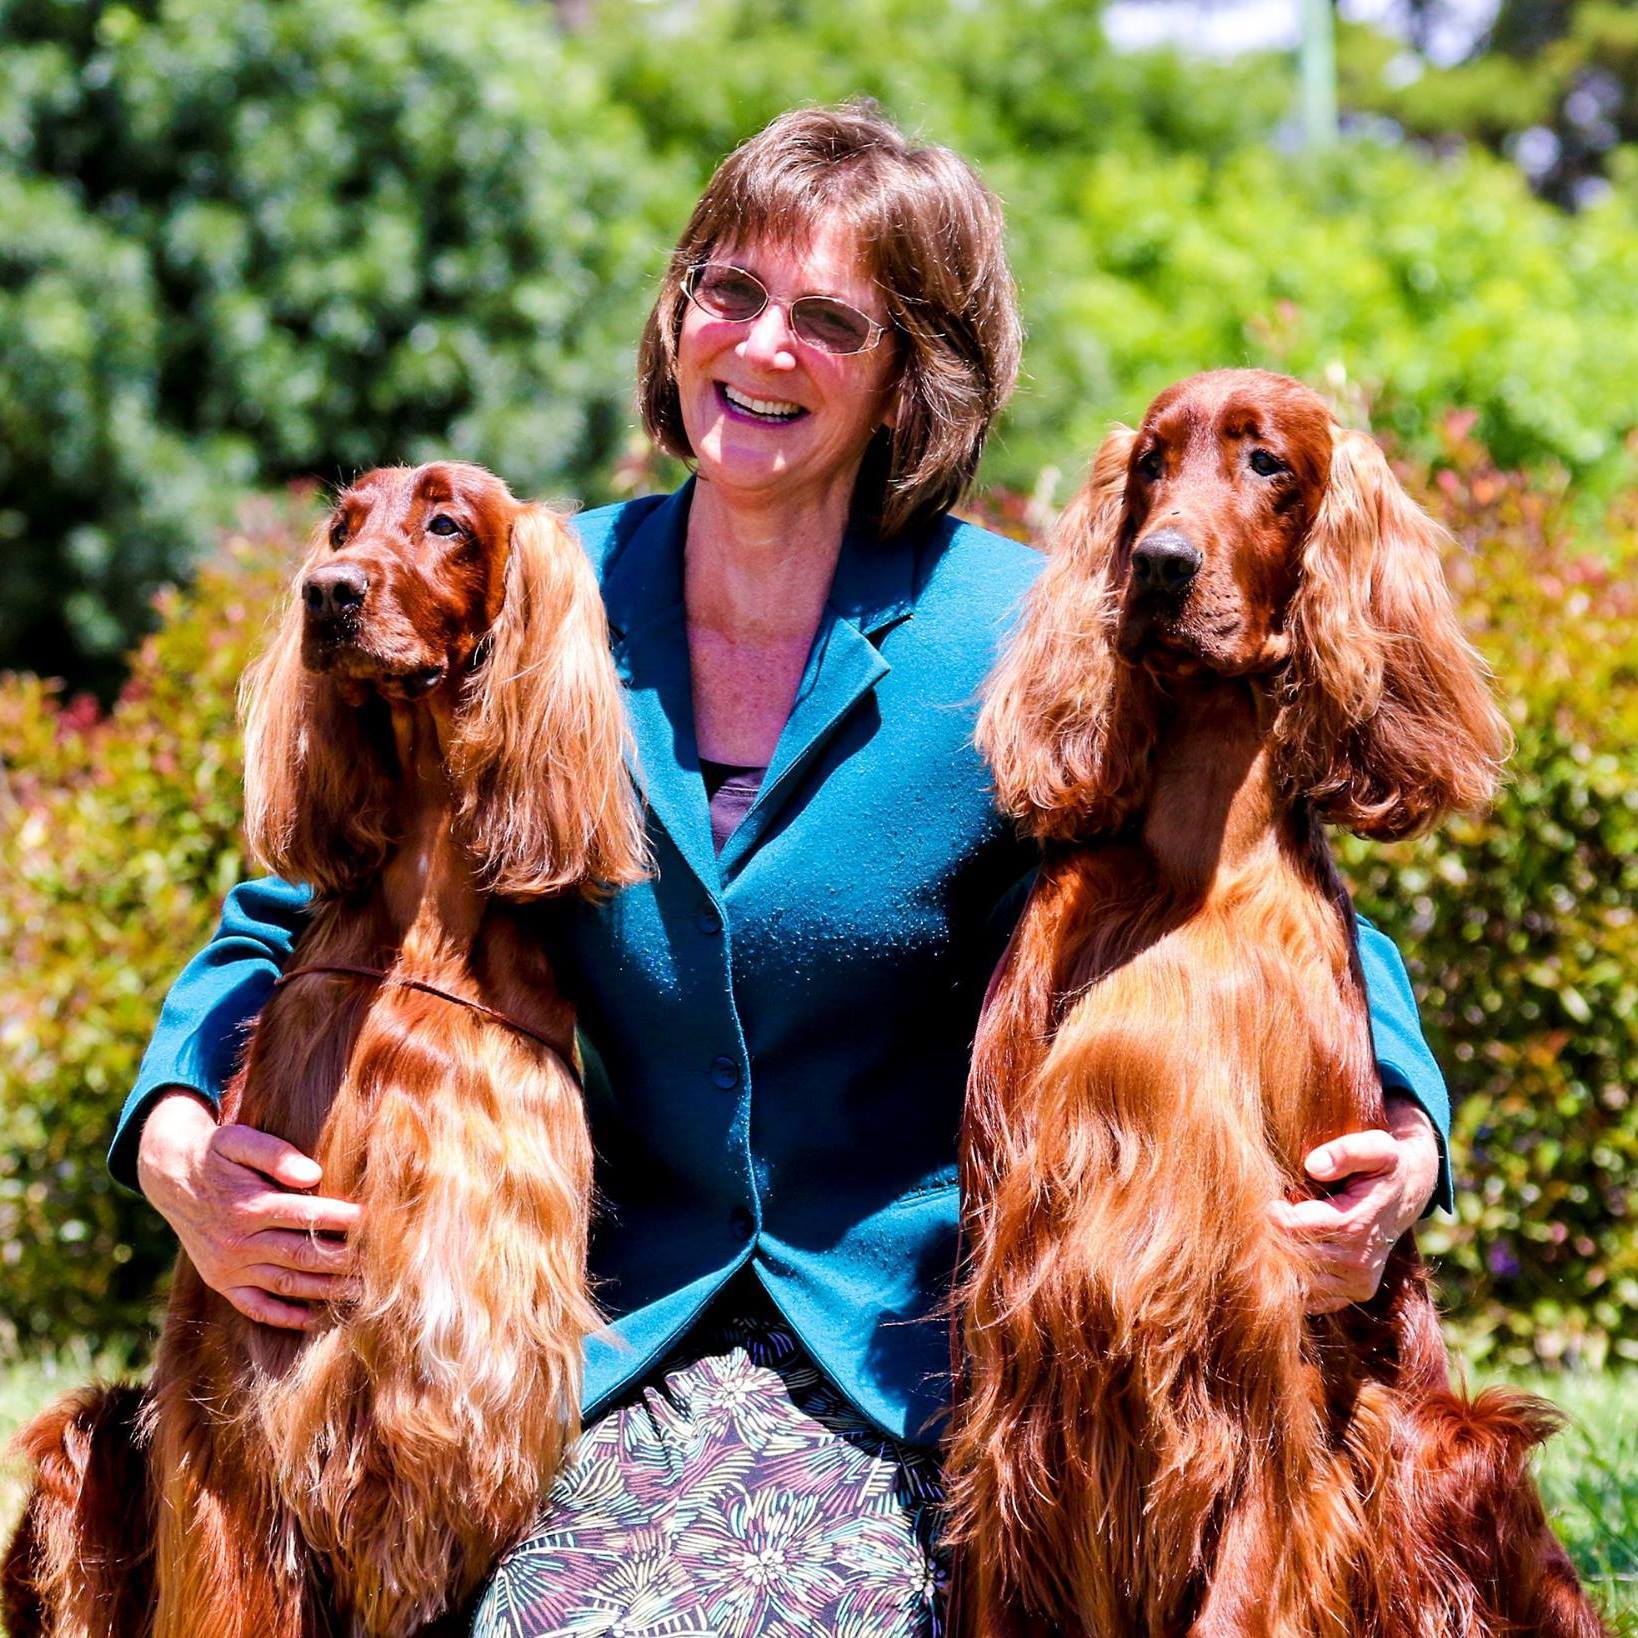 Carrie Paine kneels hugging two Irish Setter dogs at either side.